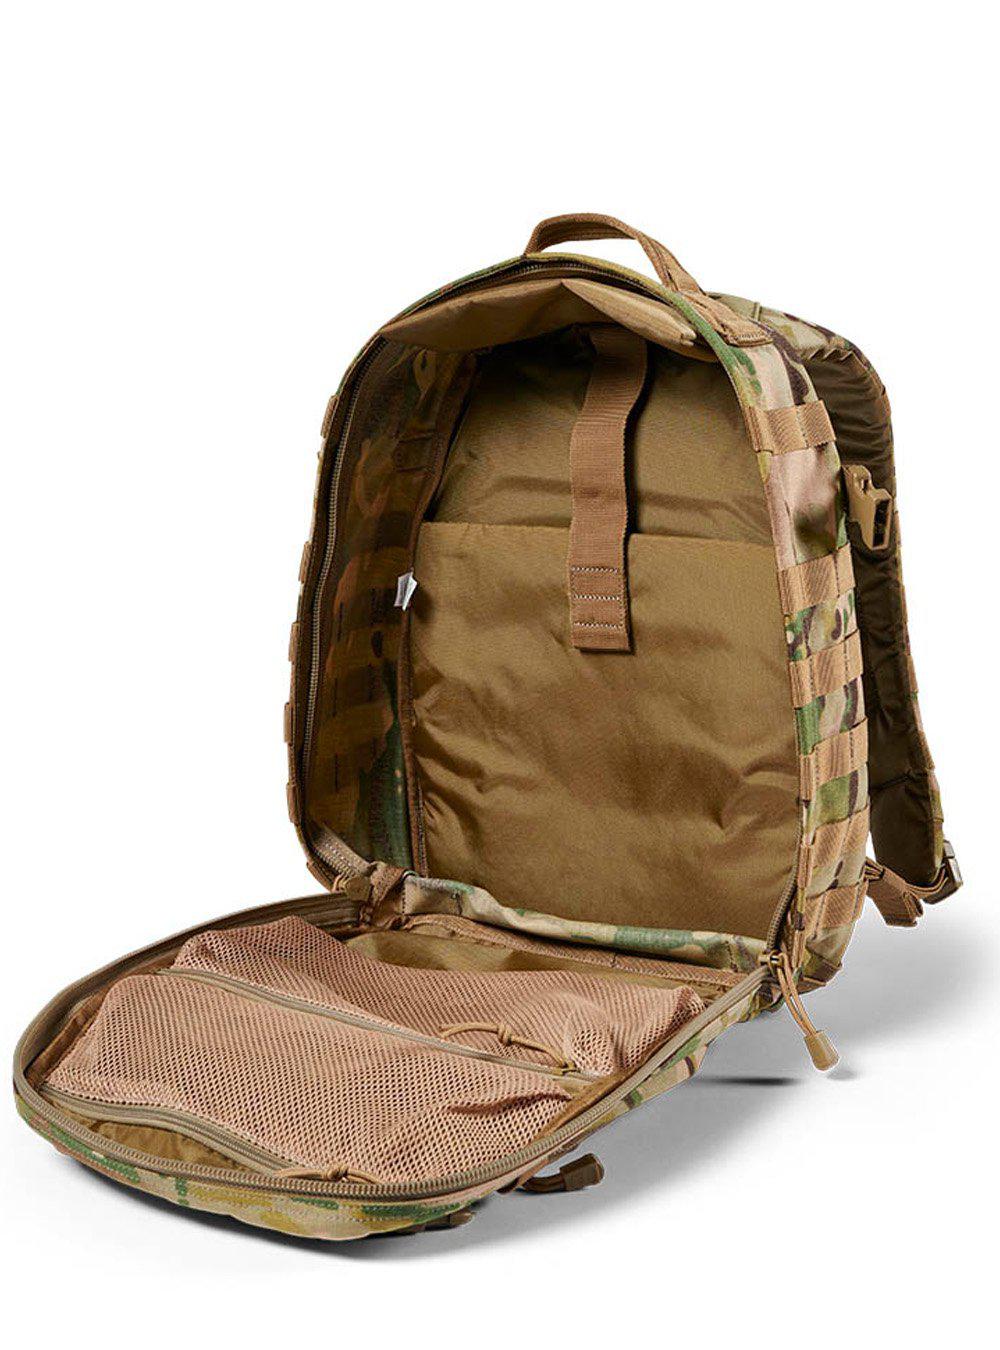 5.11 Tactical RUSH 12 2.0 Backpack - Multicam - TacSource